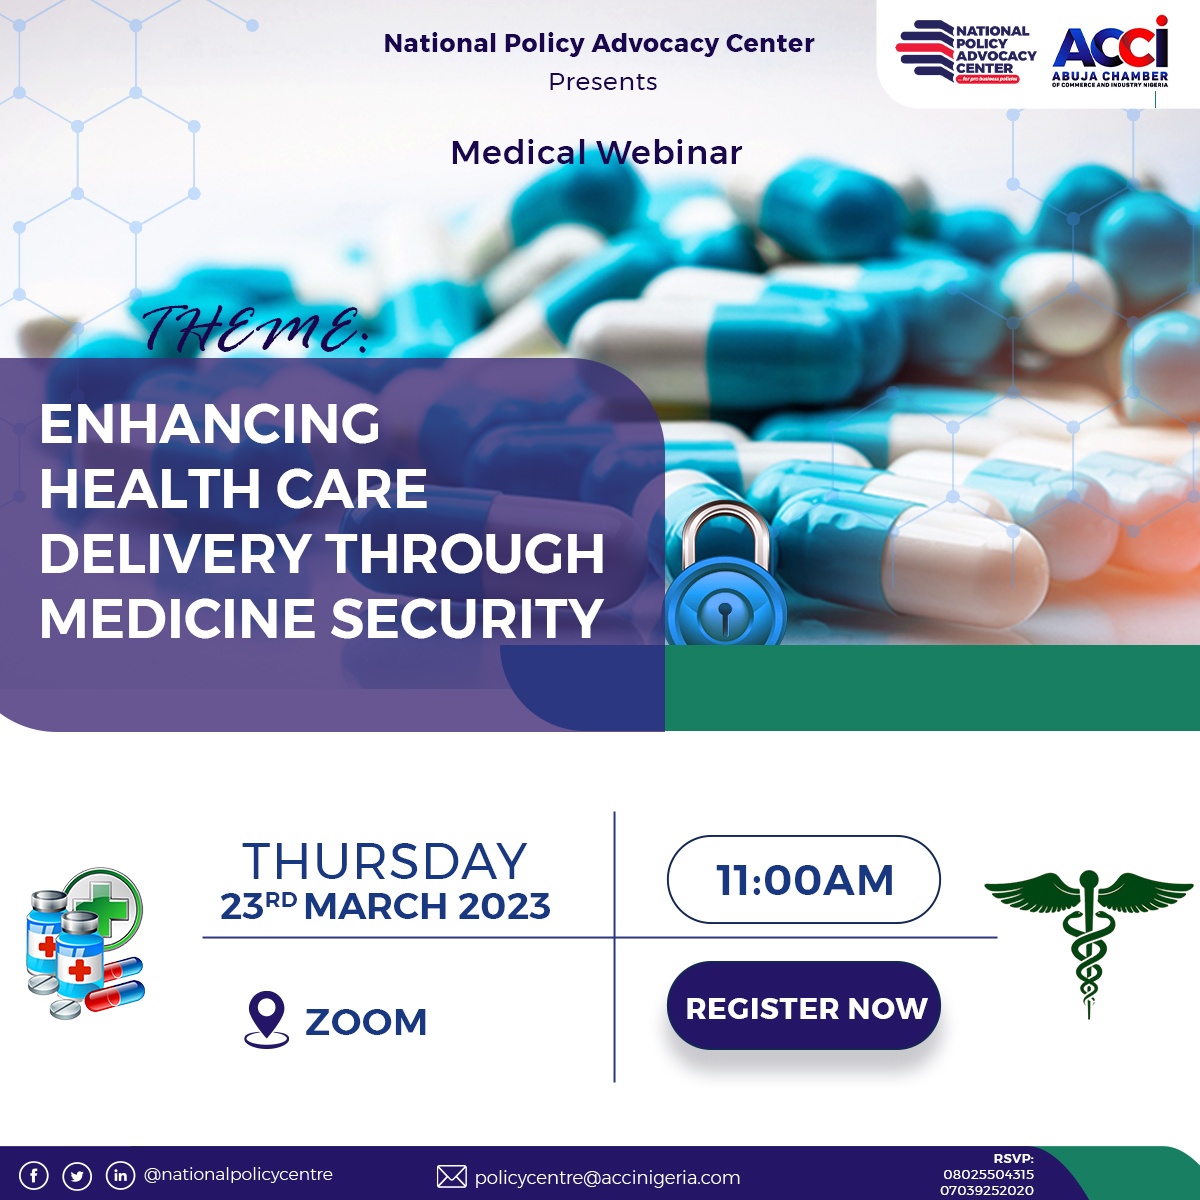 How can Healthcare service be affordable in Nigeria?

Join the conversation Now: lnkd.in/dNYHsTDG 
#medicinedelivery #healthcareforall #medicaldevicemanufacturing #pharmaceuticalindustry #pharmaceuticalmanufacturing #medicine